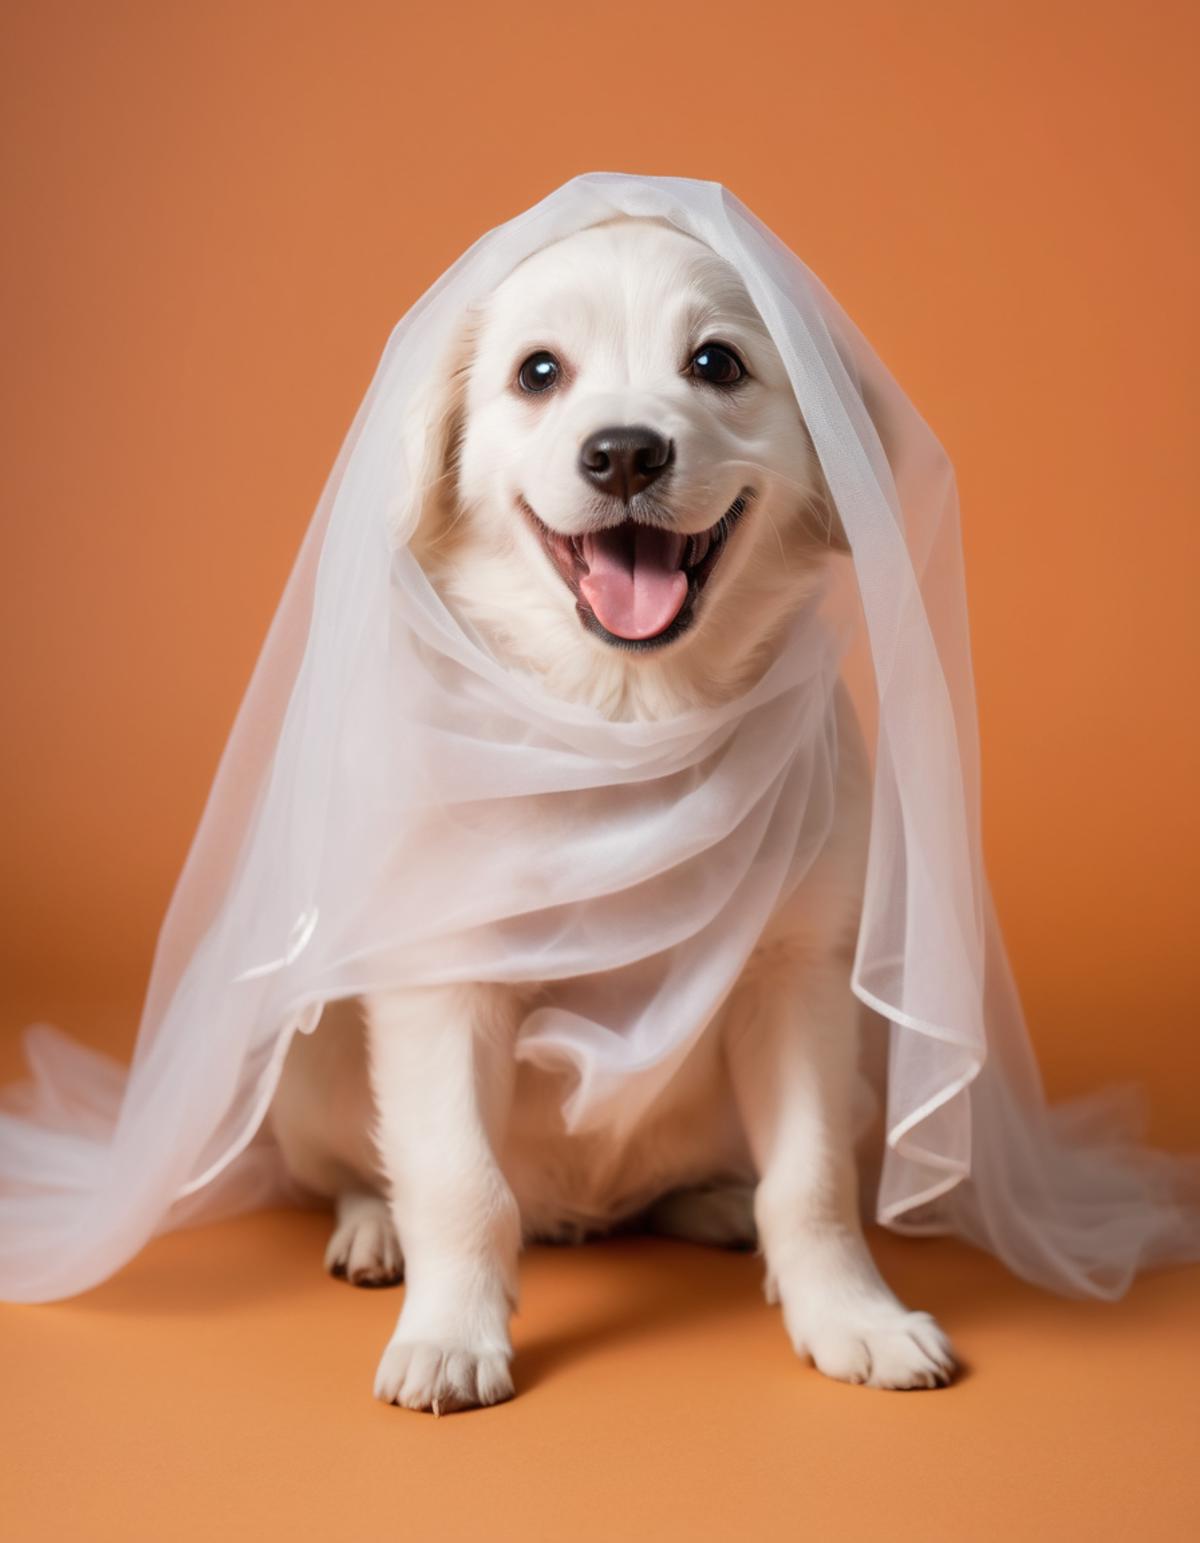 White dog wearing a veil with a smile on its face.